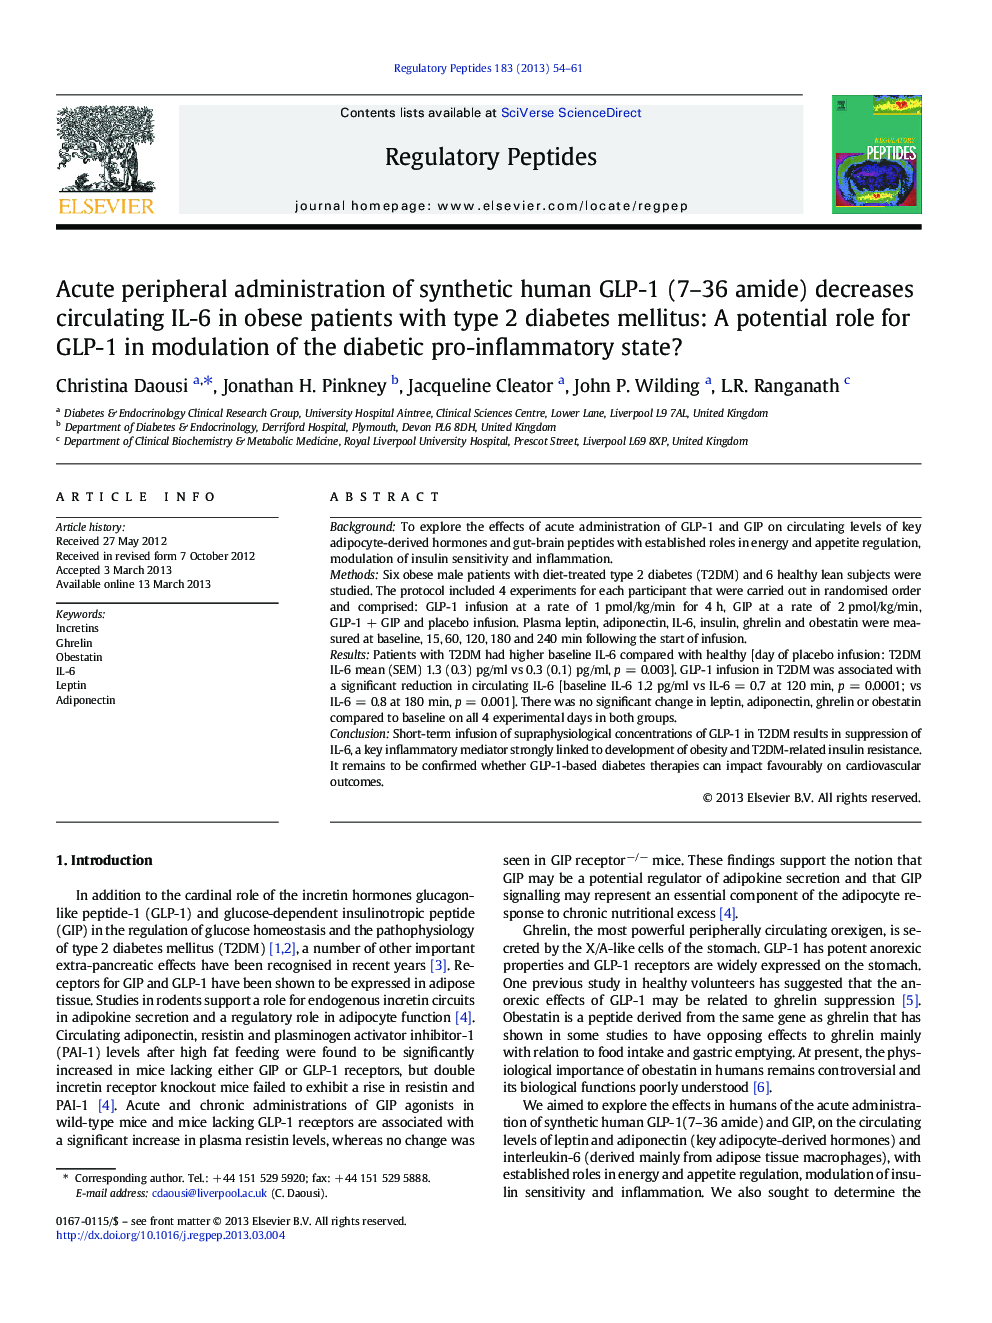 Acute peripheral administration of synthetic human GLP-1 (7–36 amide) decreases circulating IL-6 in obese patients with type 2 diabetes mellitus: A potential role for GLP-1 in modulation of the diabetic pro-inflammatory state?